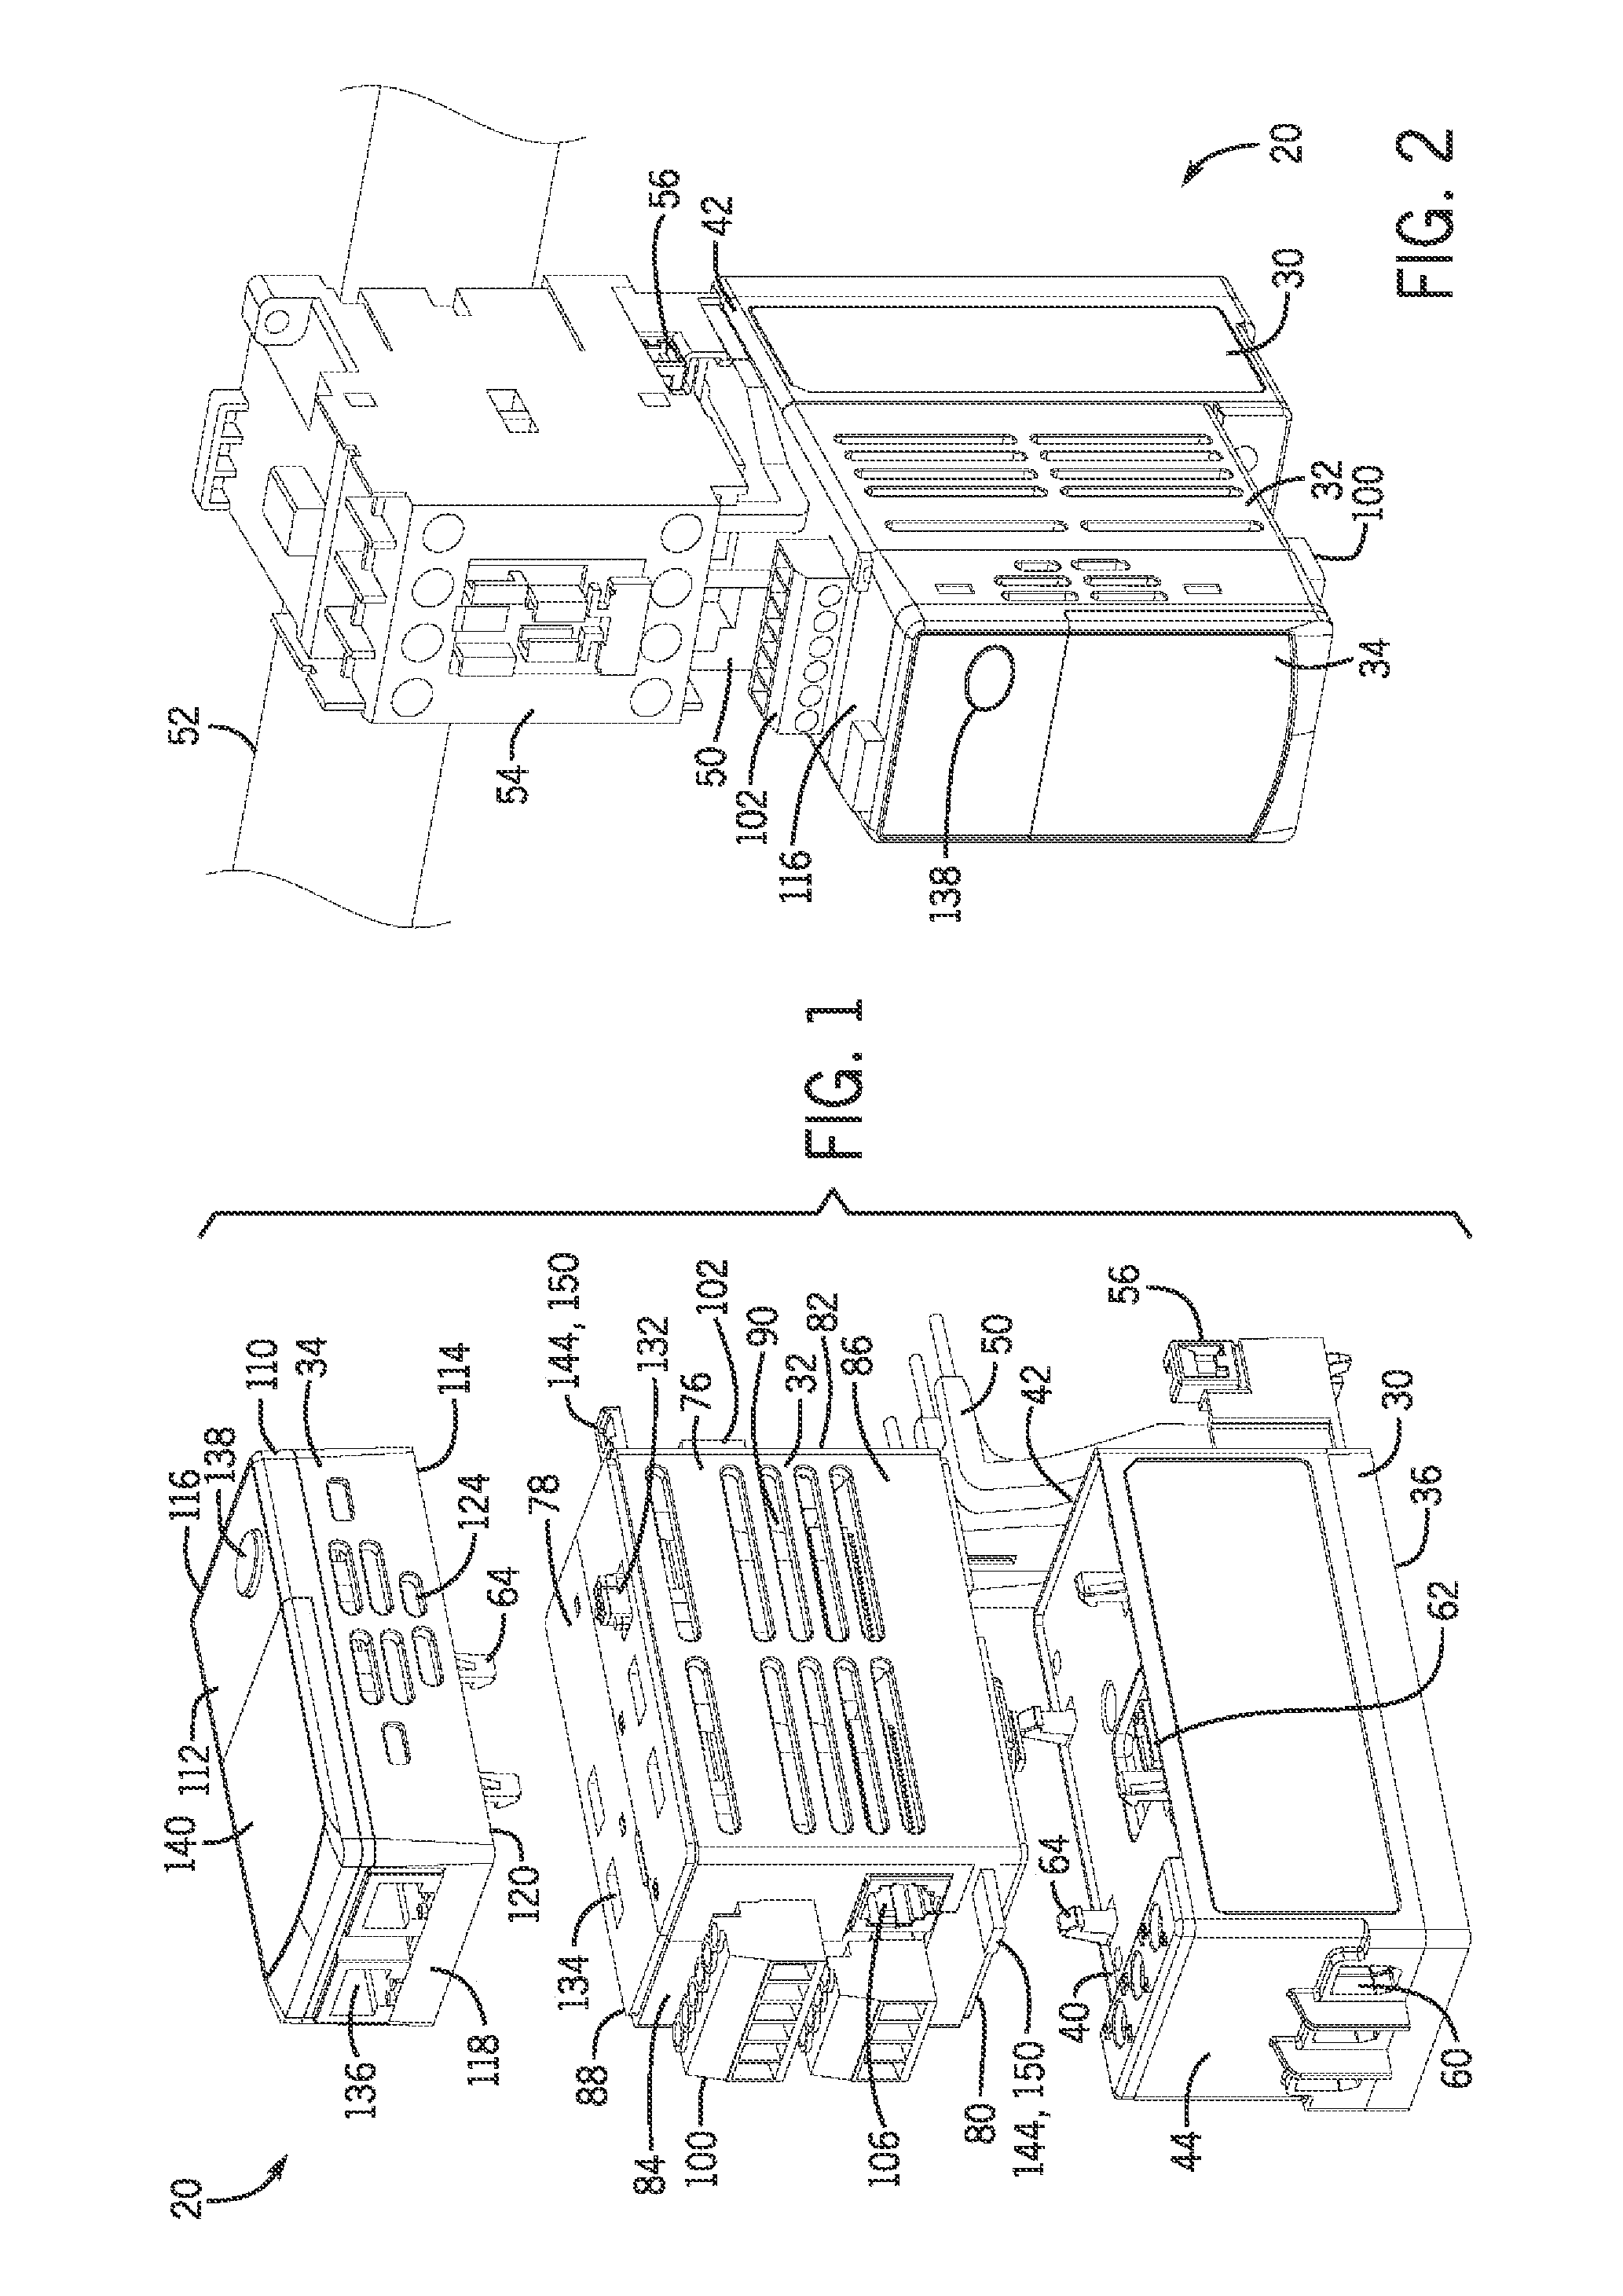 Modular Overload Relay Assembly With A Modular Communication And Human Interface Module